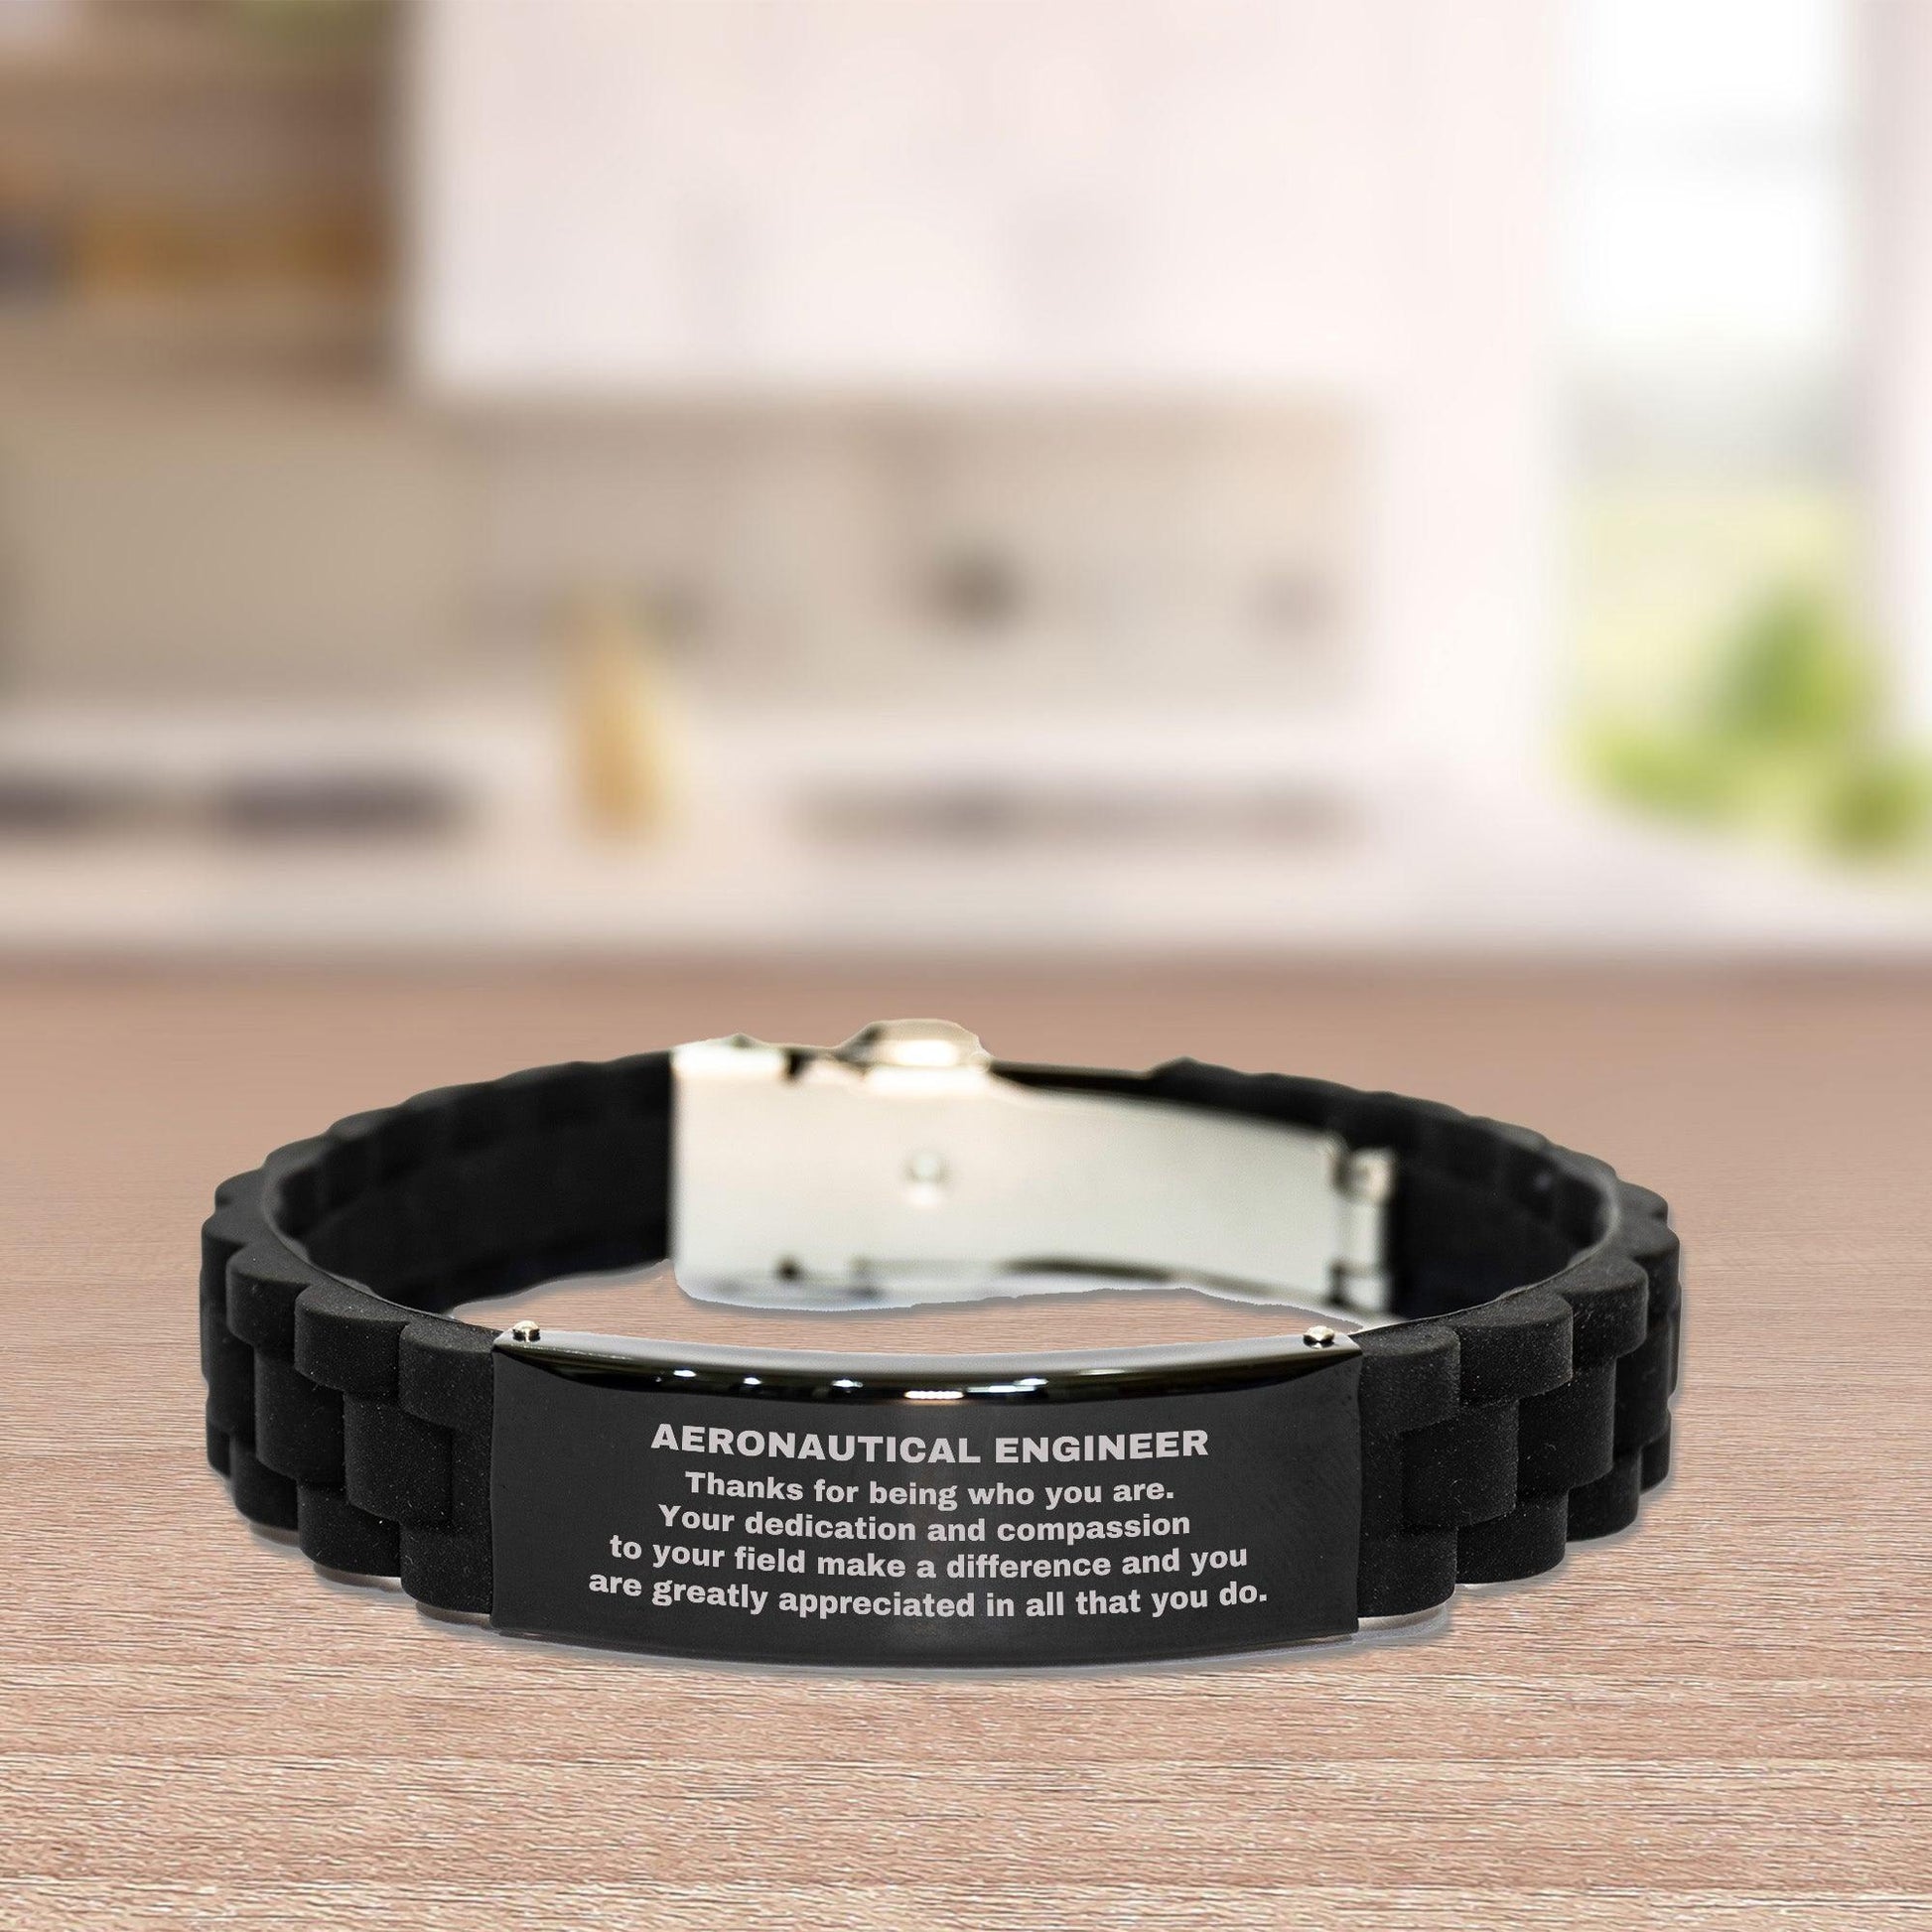 Aeronautical Engineer Black Glidelock Clasp Engraved Bracelet - Thanks for being who you are - Birthday Christmas Jewelry Gifts Coworkers Colleague Boss - Mallard Moon Gift Shop